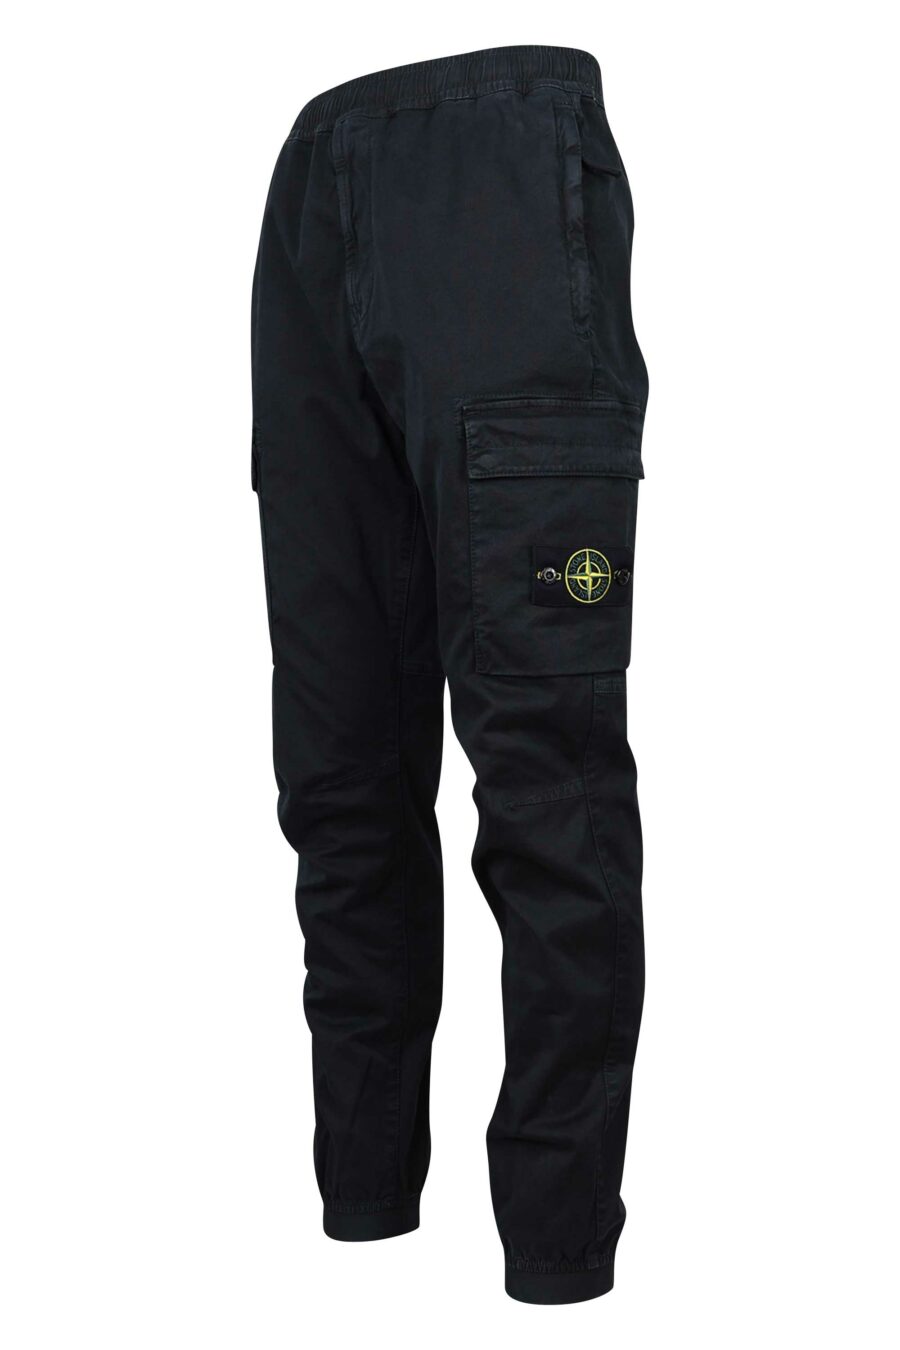 Black trousers with side logo patch - 8052572723292 1